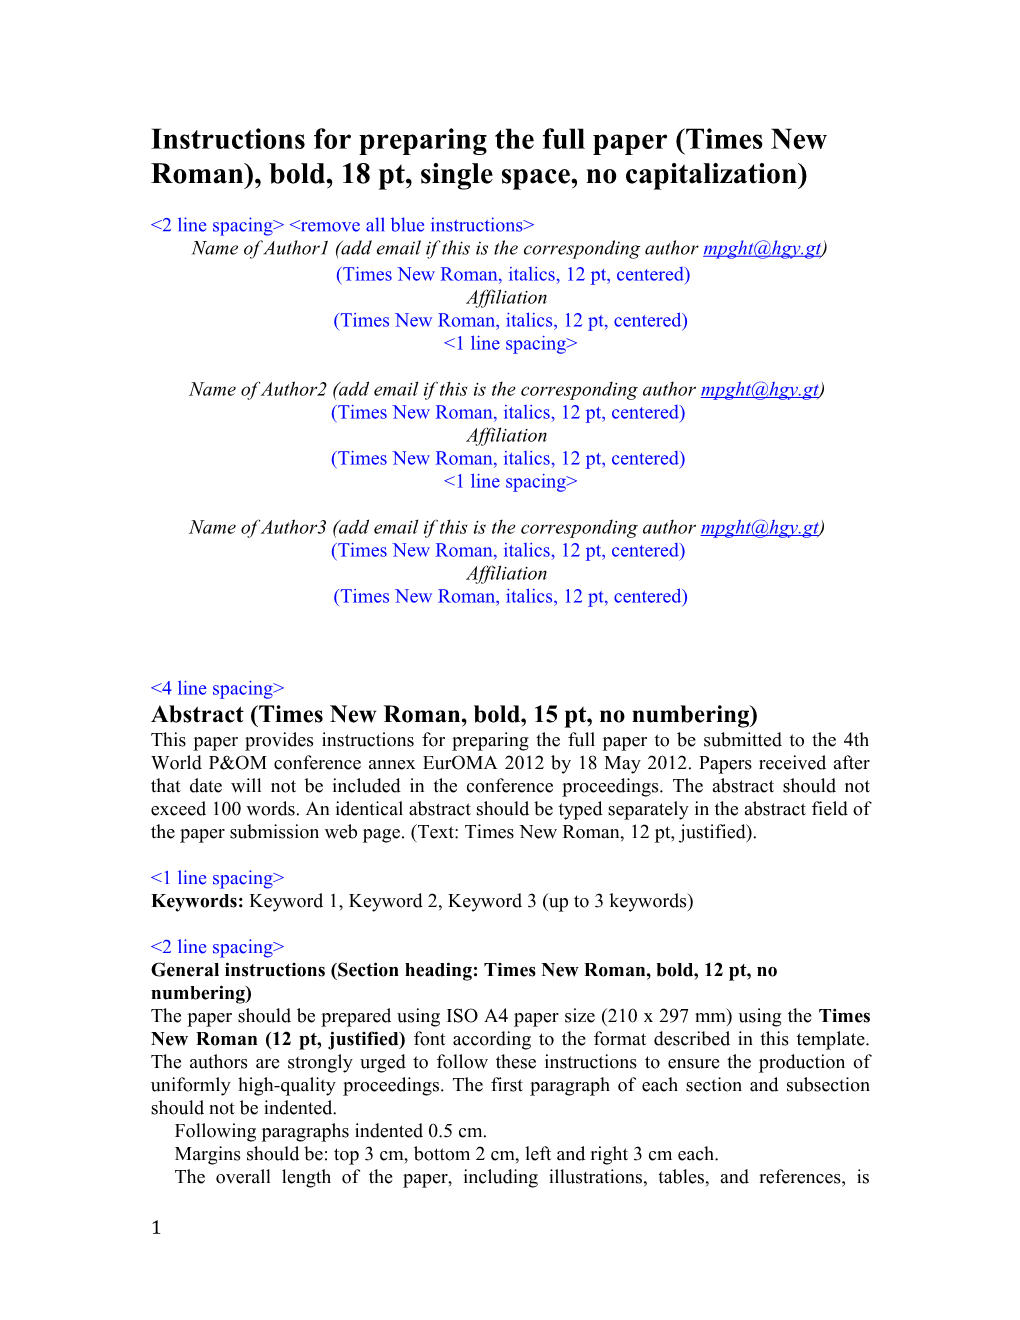 Instructions for Preparing the Full Paper (Times New Roman), Bold, 18 Pt, Single Space